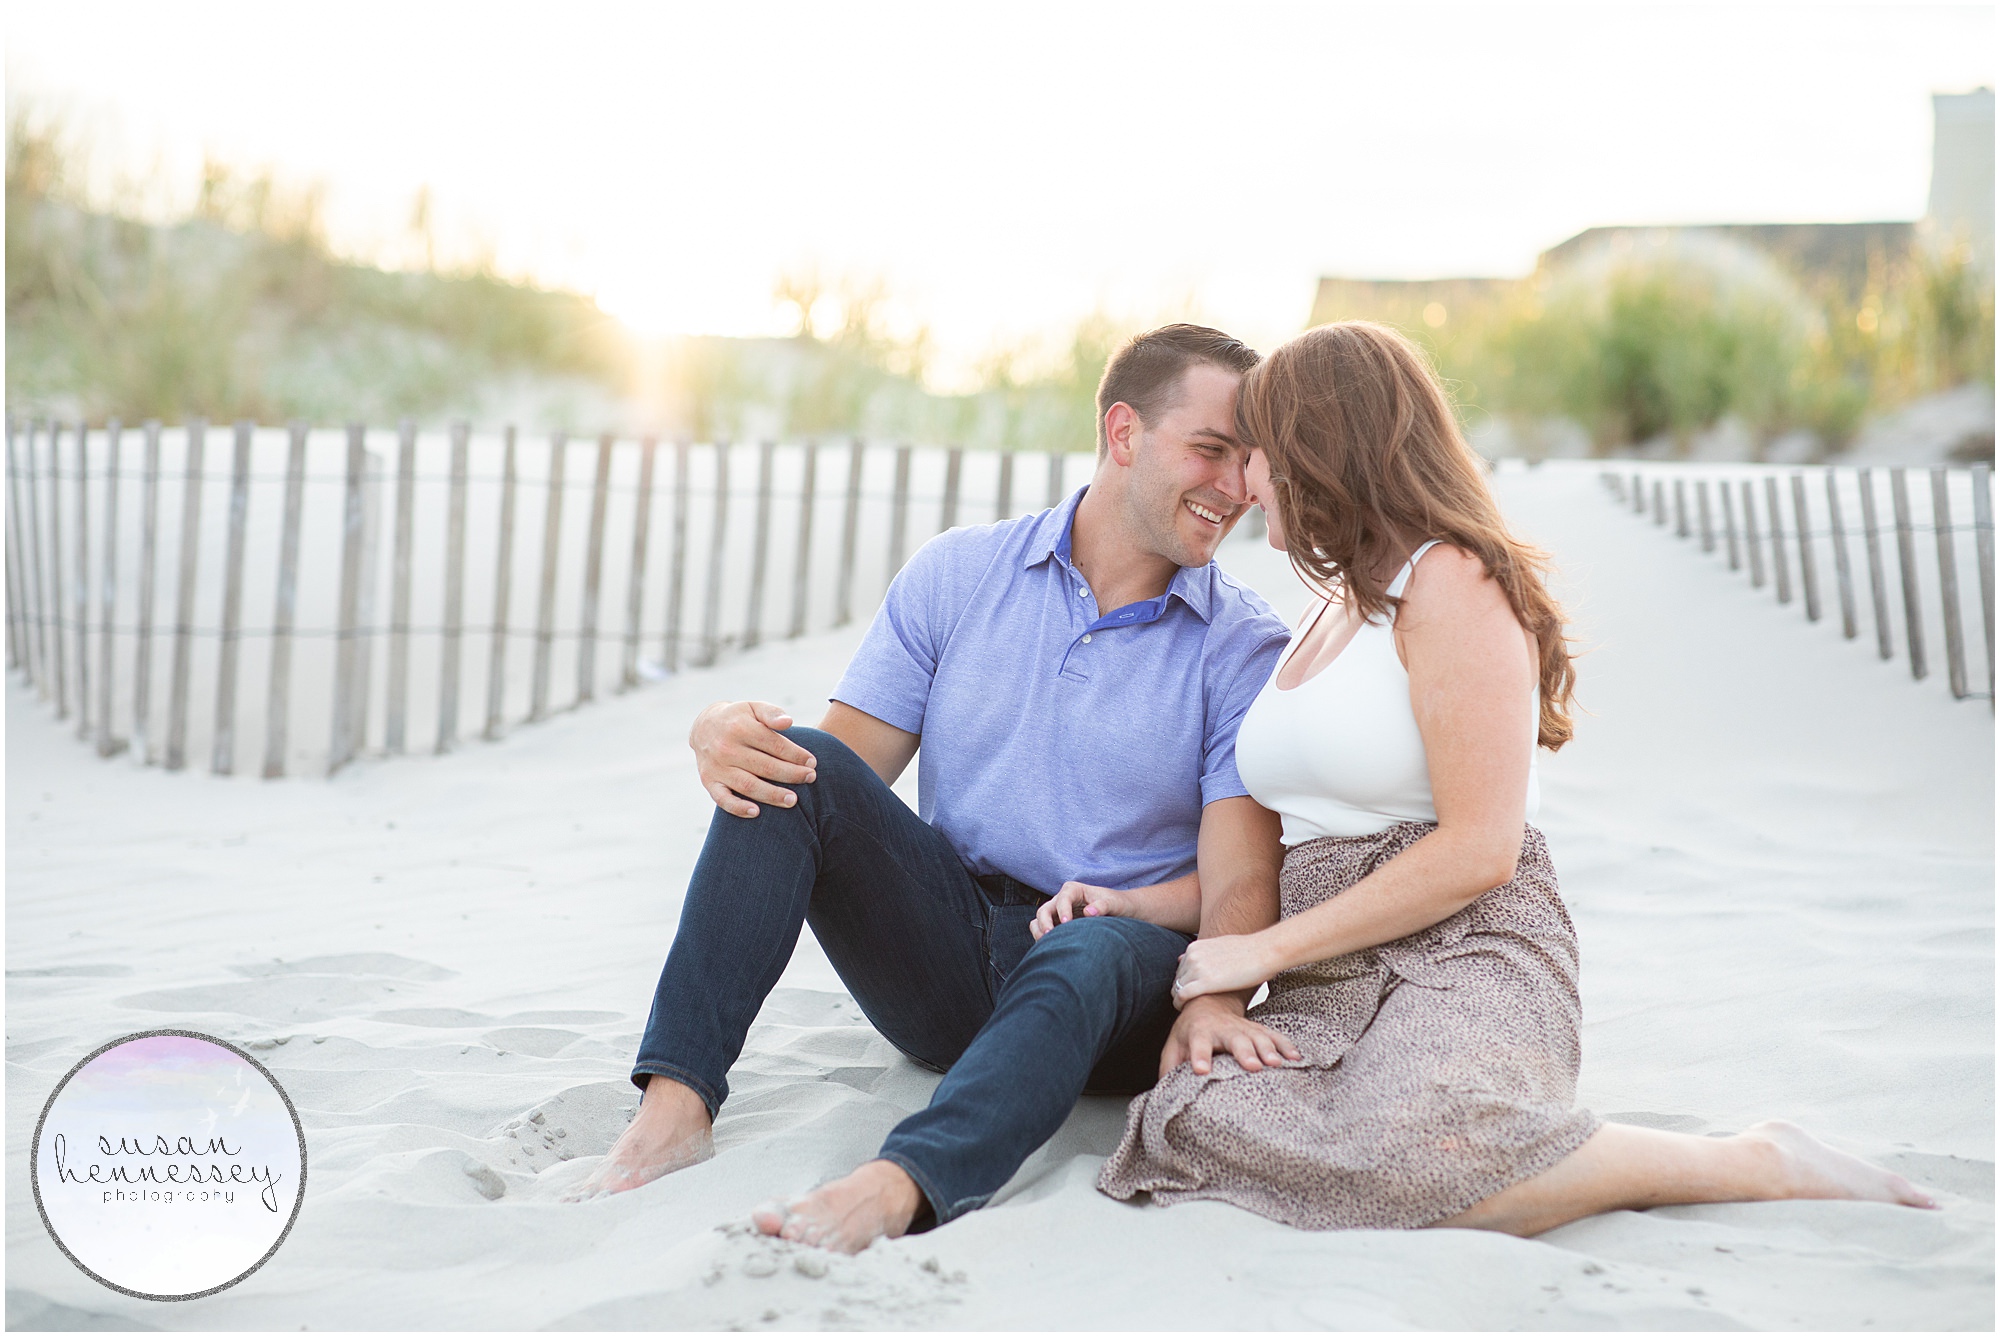 An engagement session on the beach after the couple's surprise proposal 